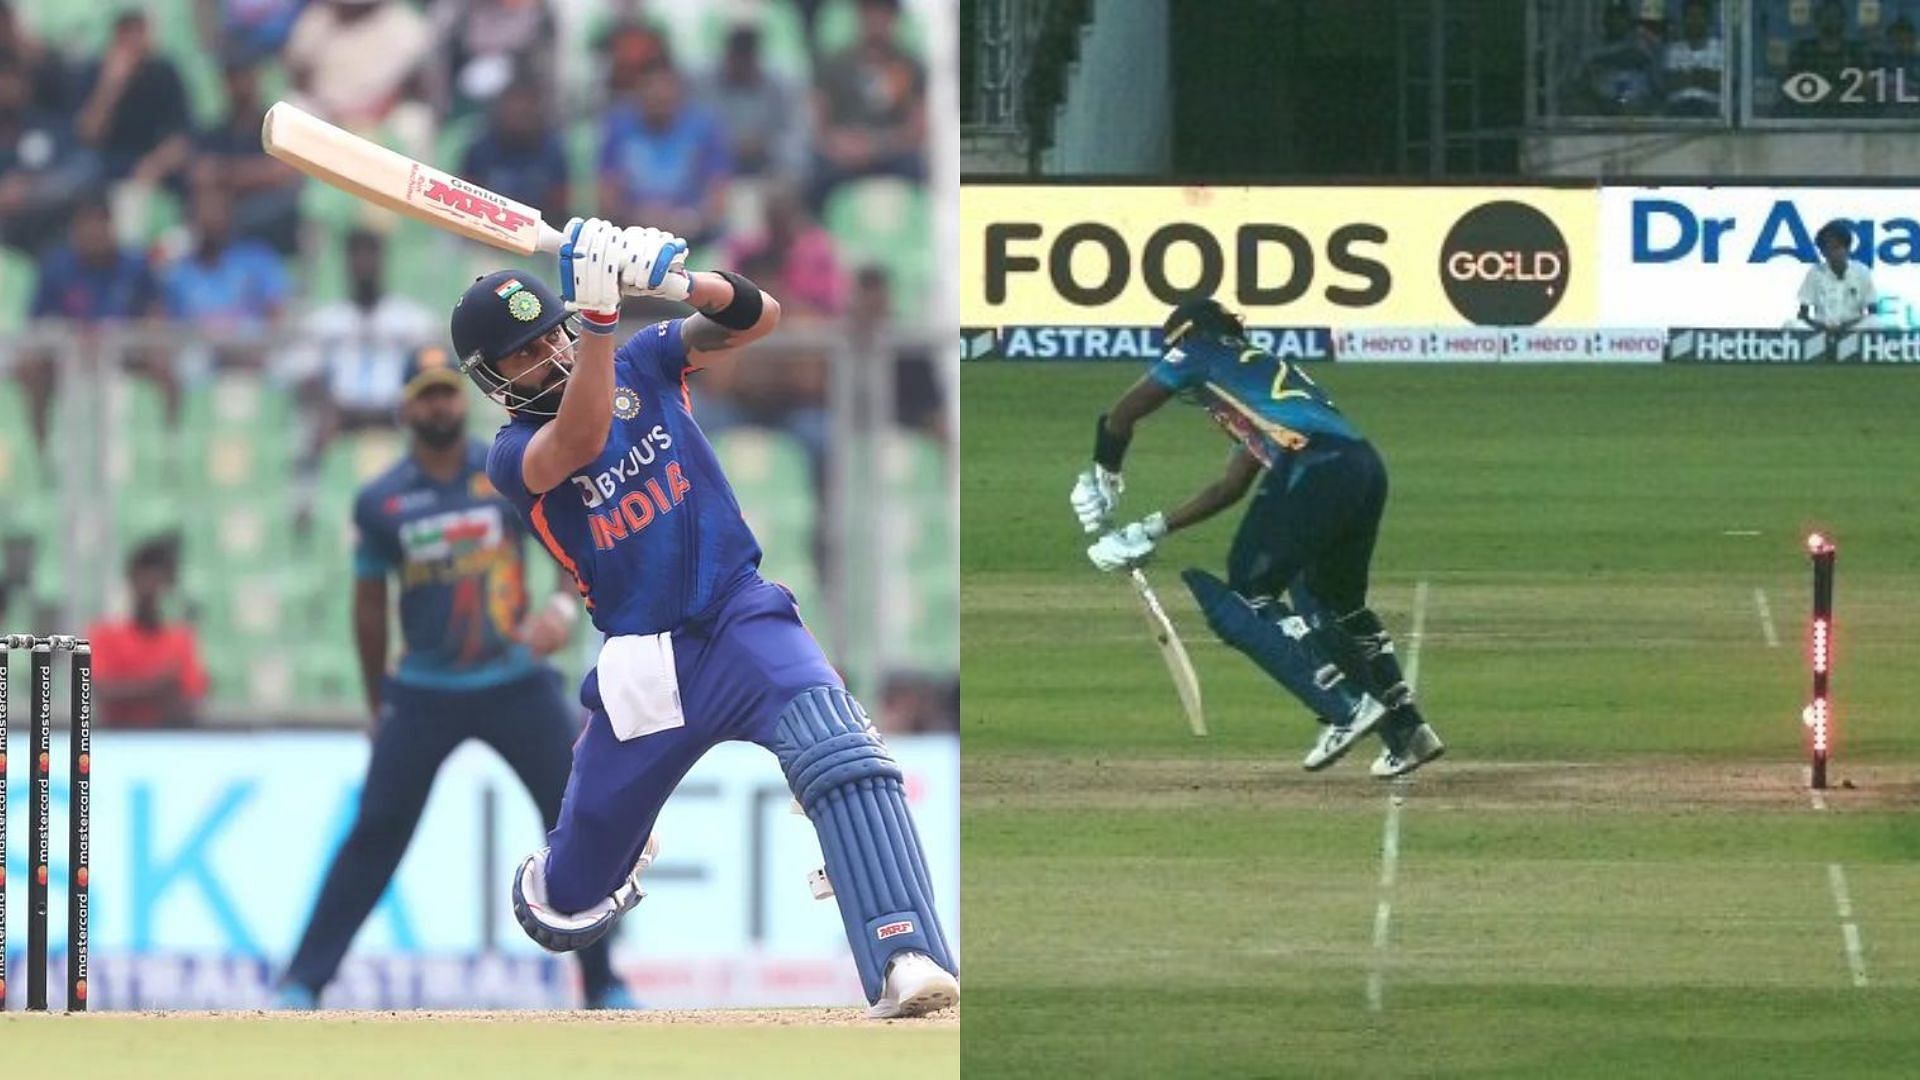 3 moments from IND vs SL 3rd ODI that created buzz among fans